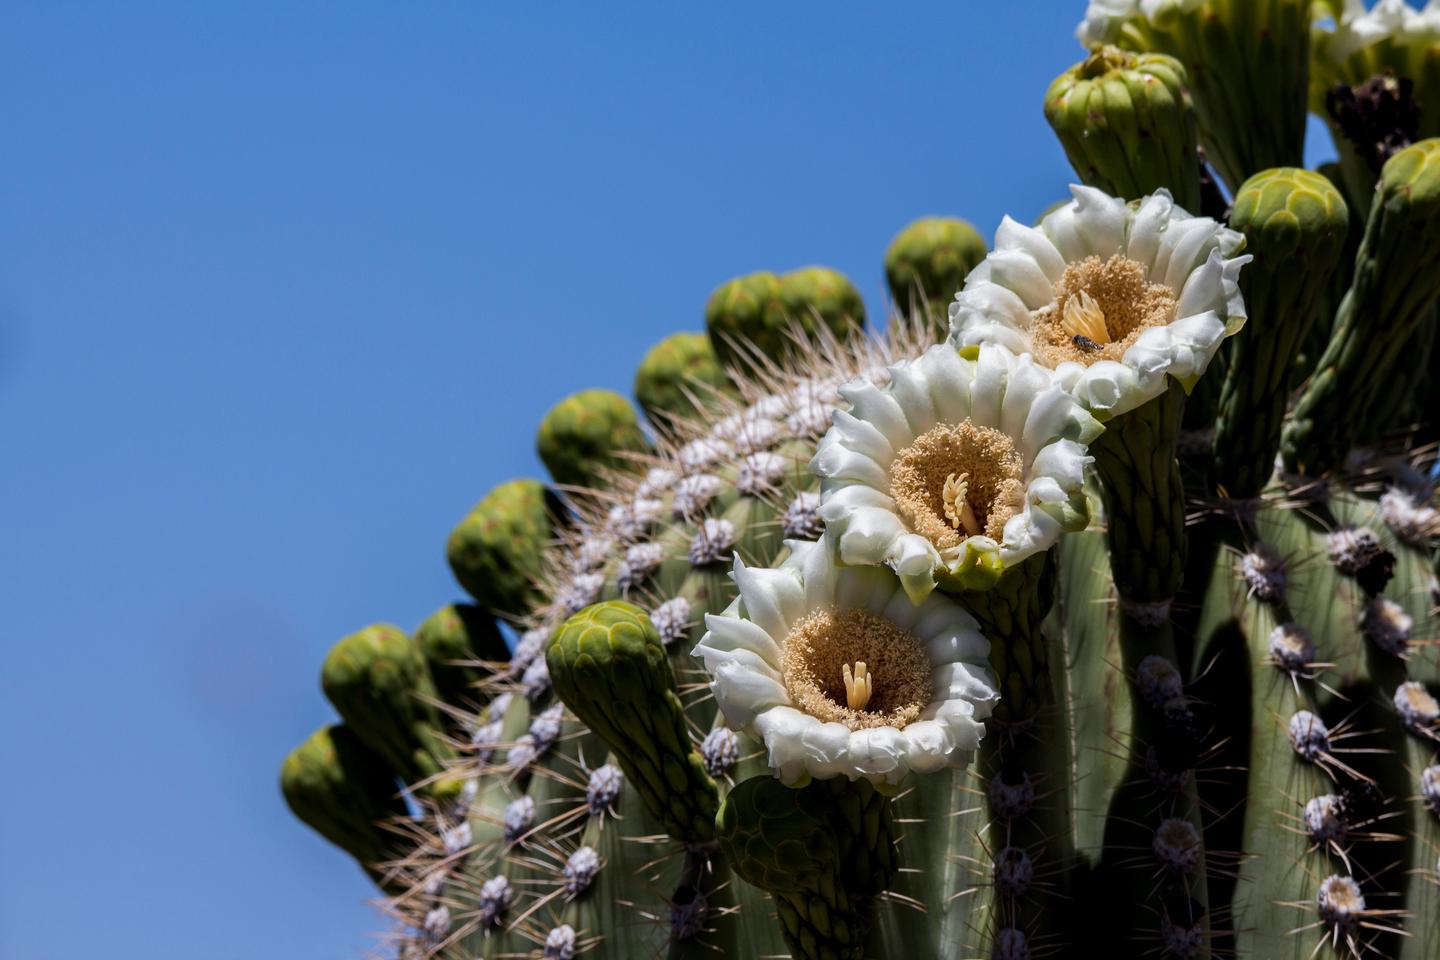 Saguaro FlowersThe flowering season in Saguaro National Park attracts visitors from all over the world.